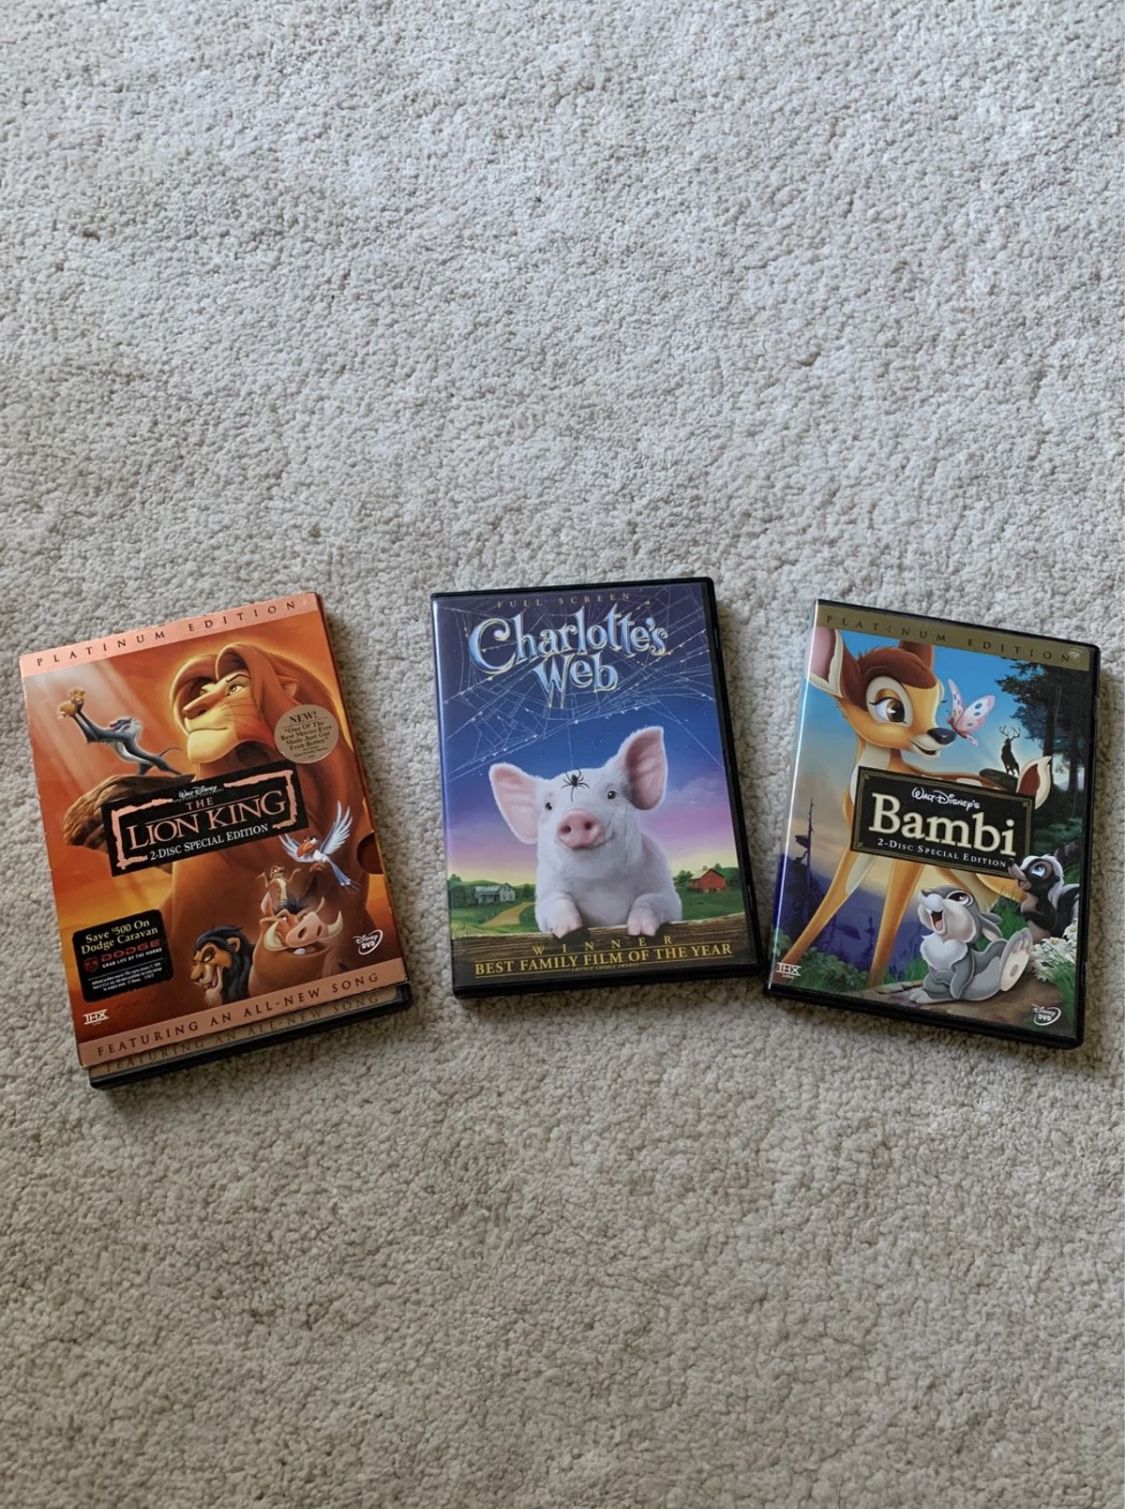 DVD Lion king and Charlotte and Bambi